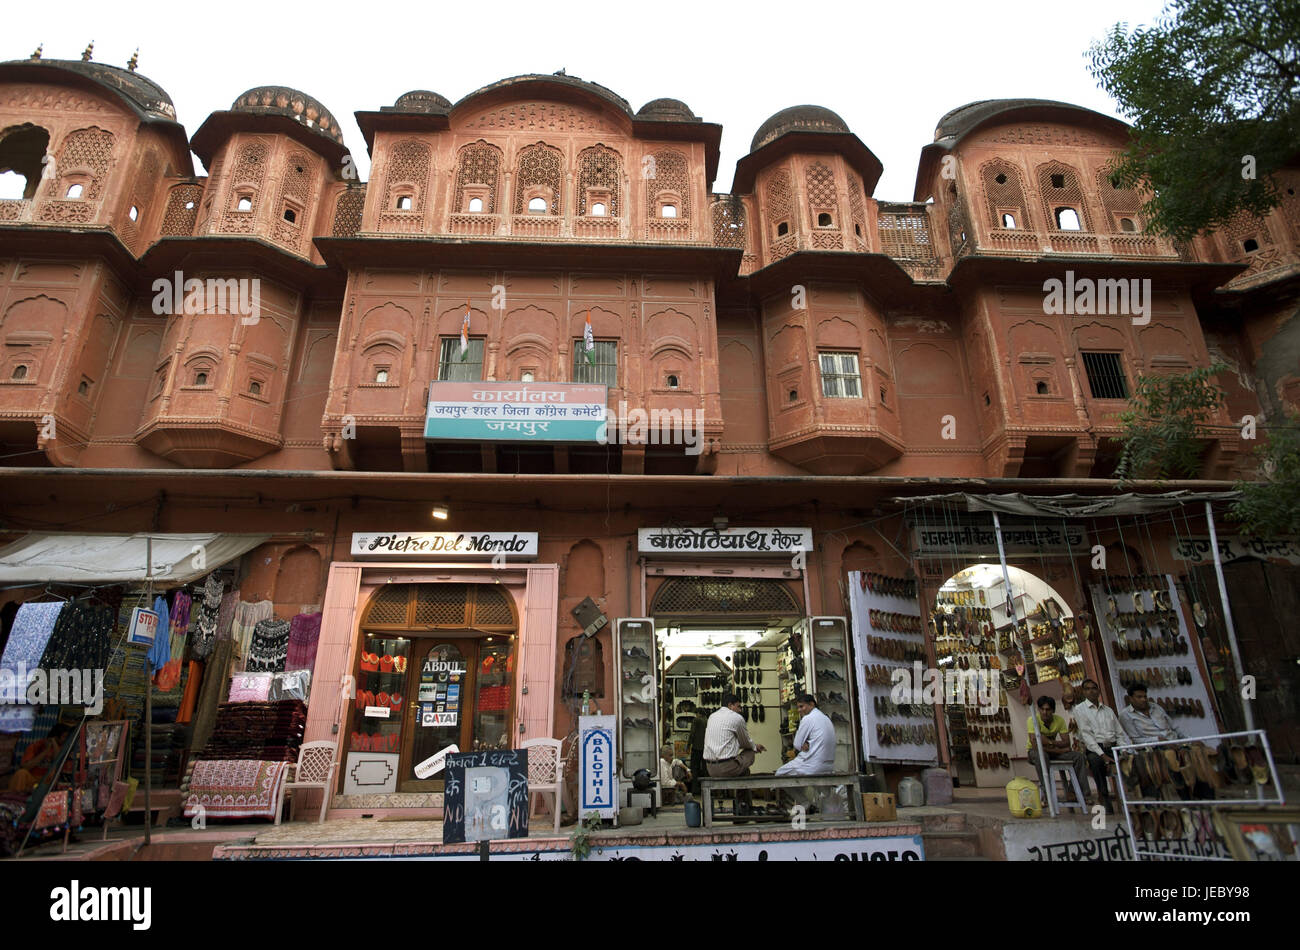 India, Rajasthan, Jaipur, Old Town, building, small shops, from below, Stock Photo